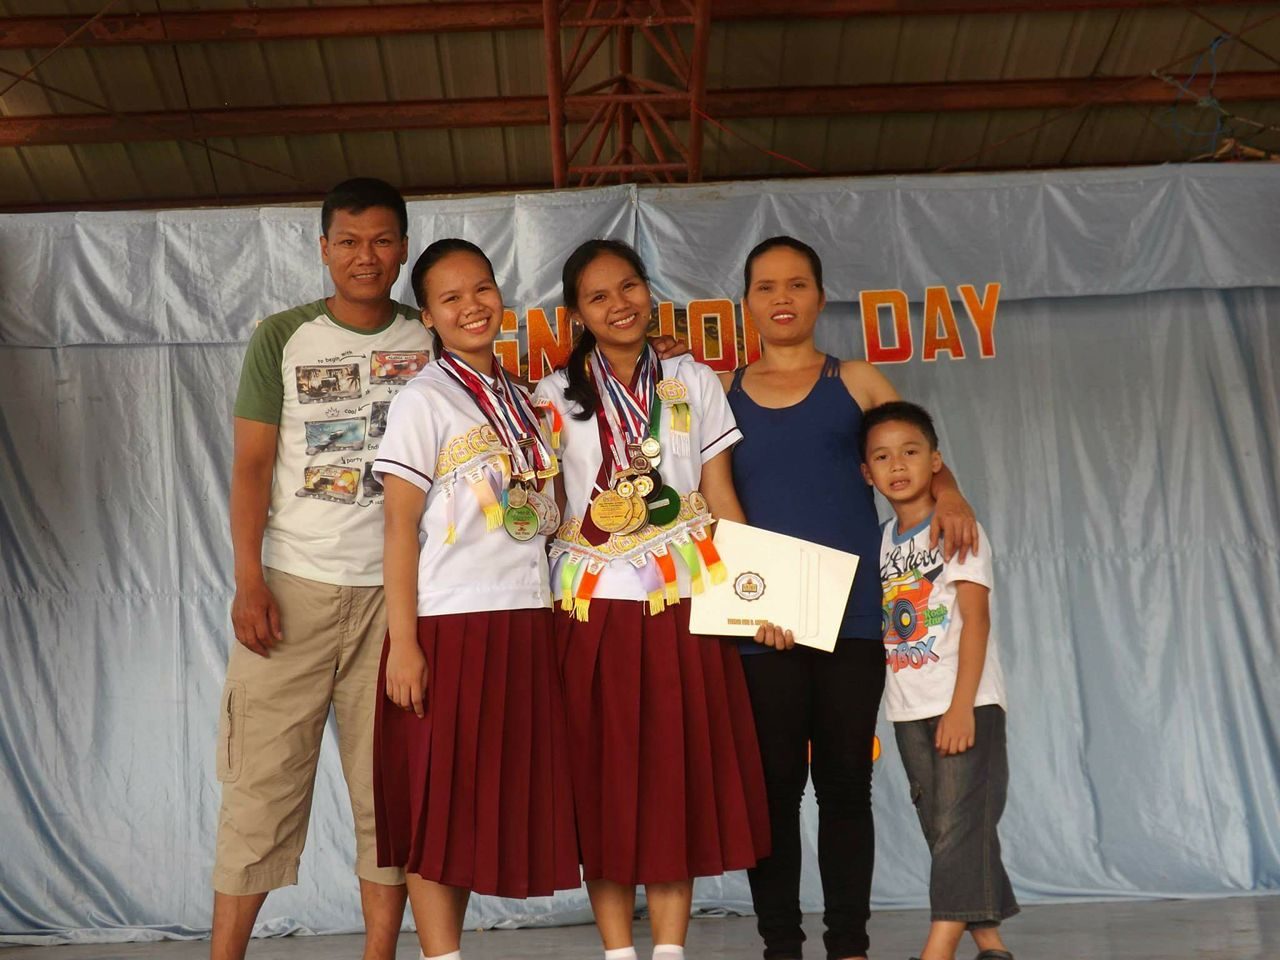 HARD WORK. Trisha Marie and Earl Joy dedicate their achievements to their parents to thank them for their sacrifices and hard work